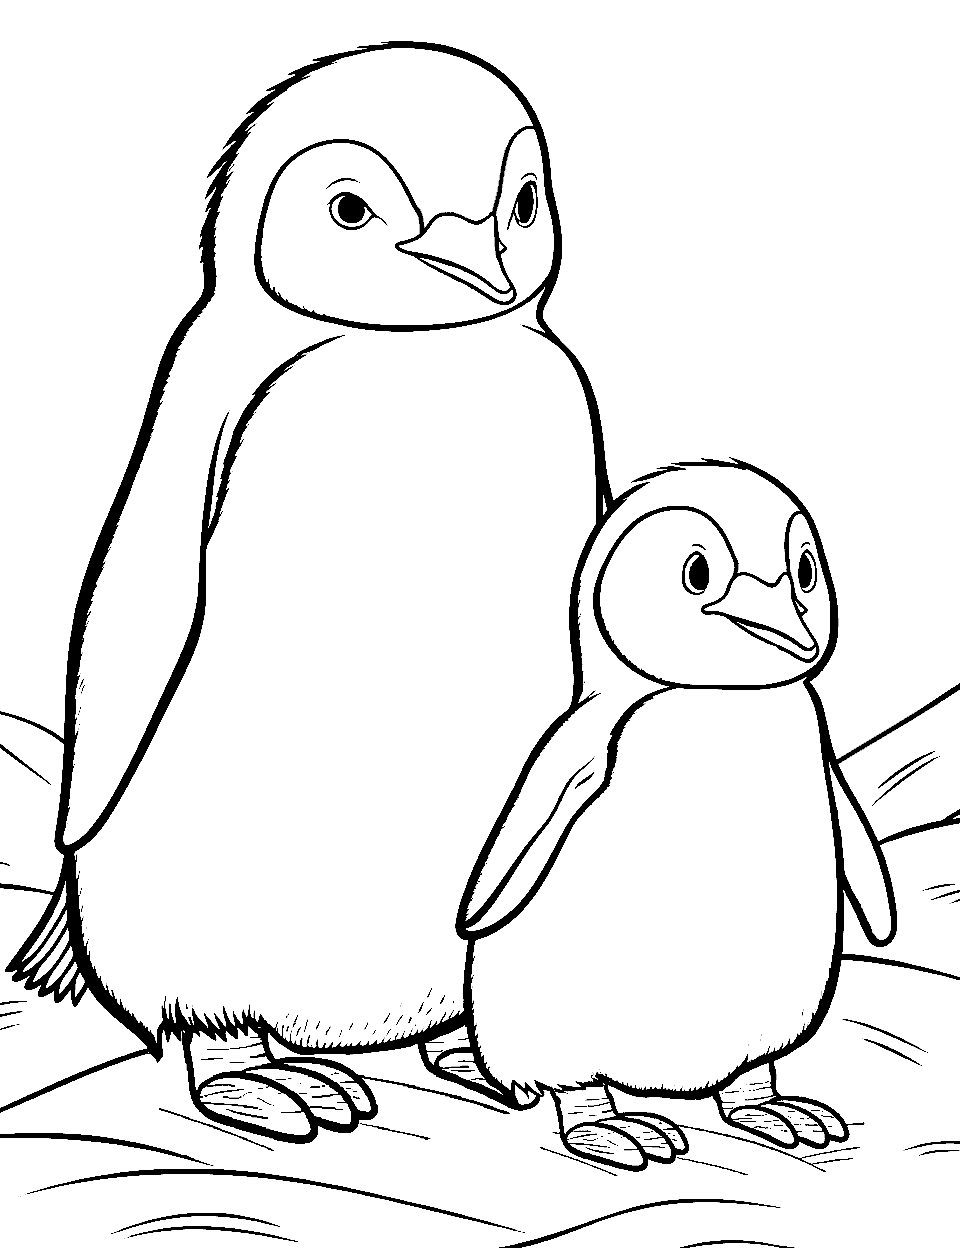 Mother and Baby Penguin Coloring Page - A caring mother penguin and a baby penguin on a snowy patch.